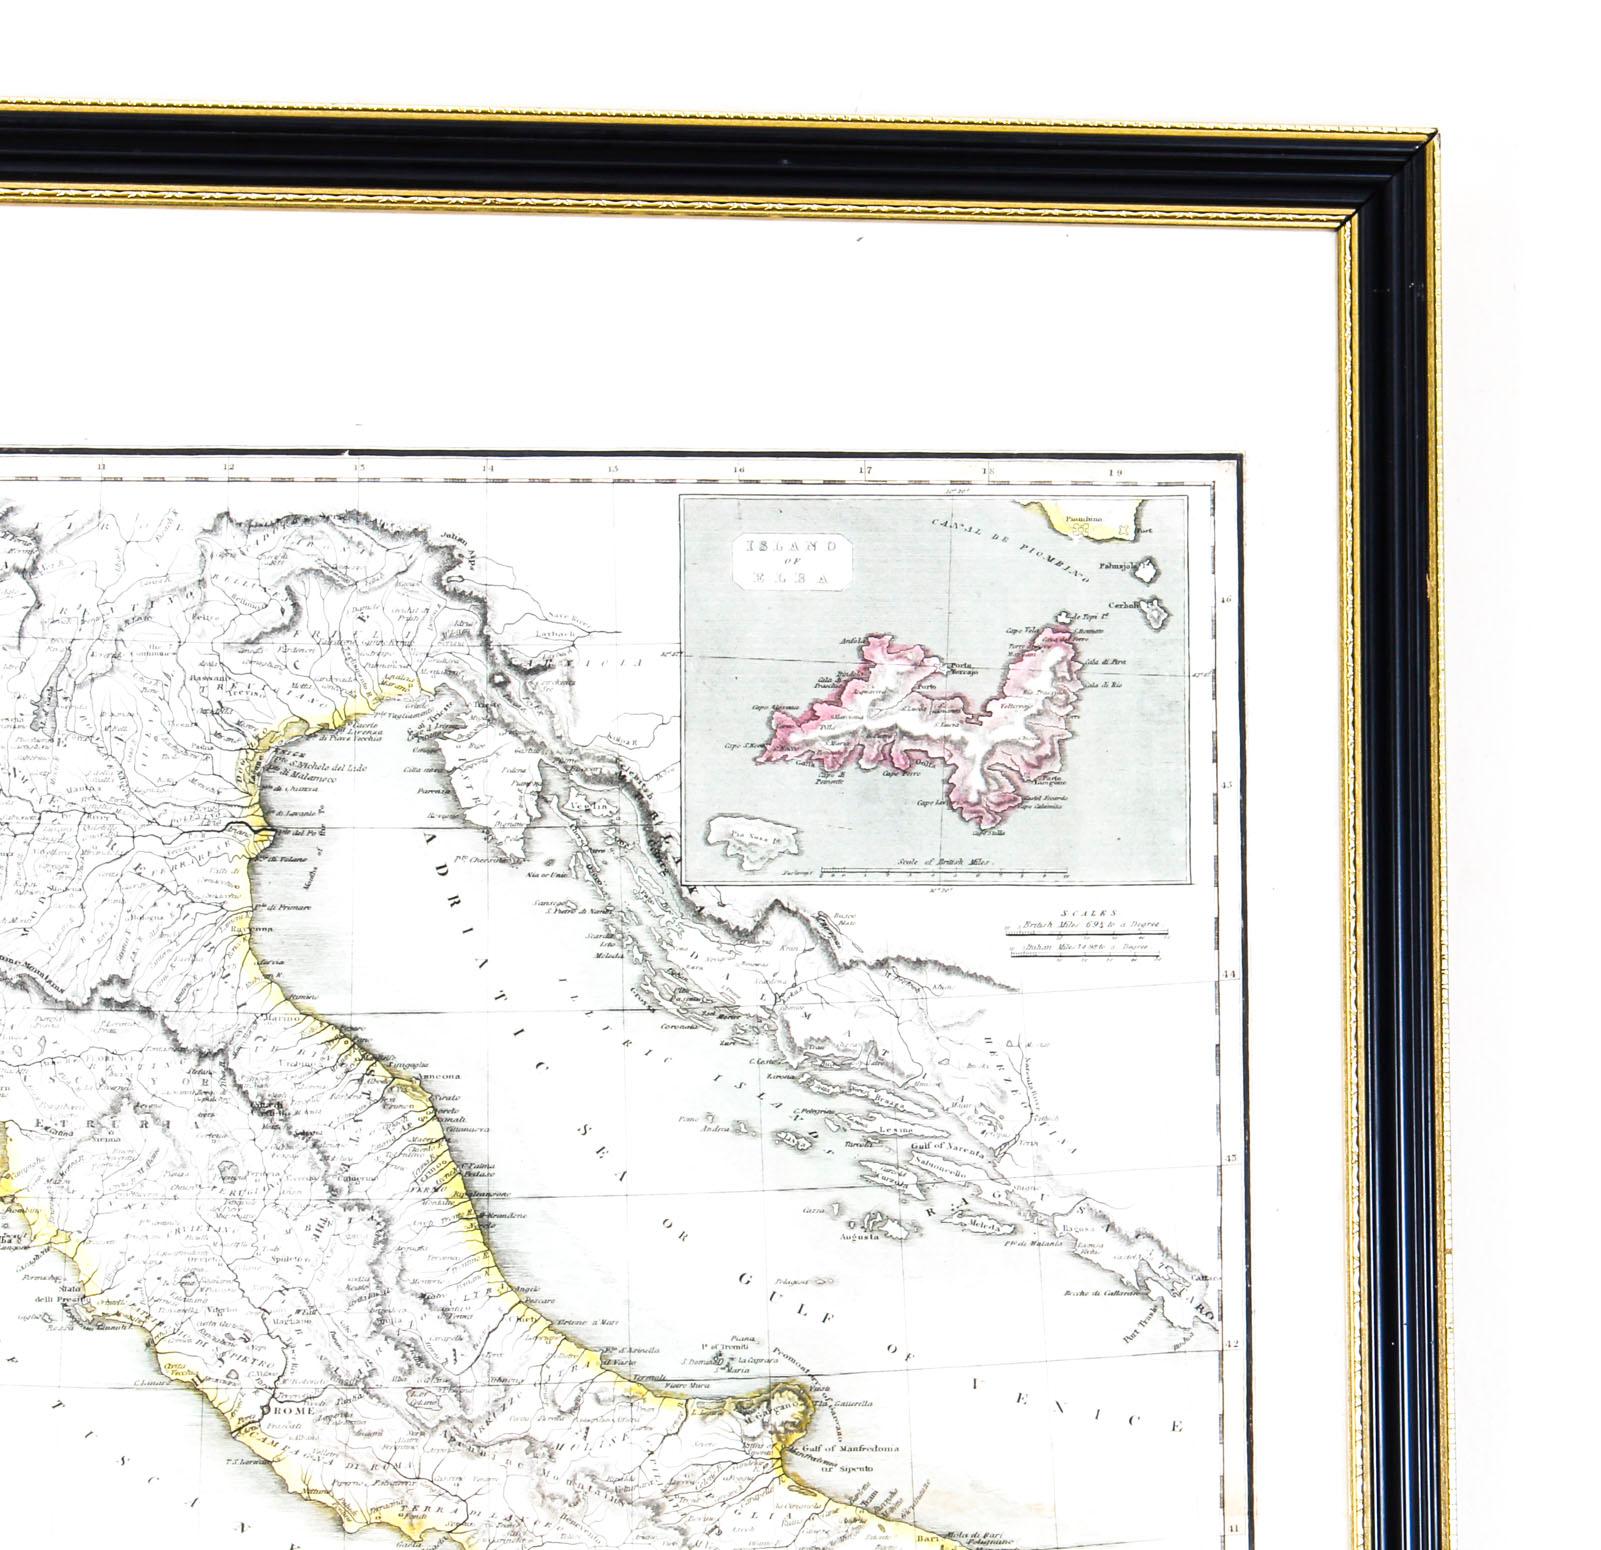 Scottish Antique Map of Italy Drawn & Engraved by R. Scott for Thomsons, Edinburgh 1814 For Sale